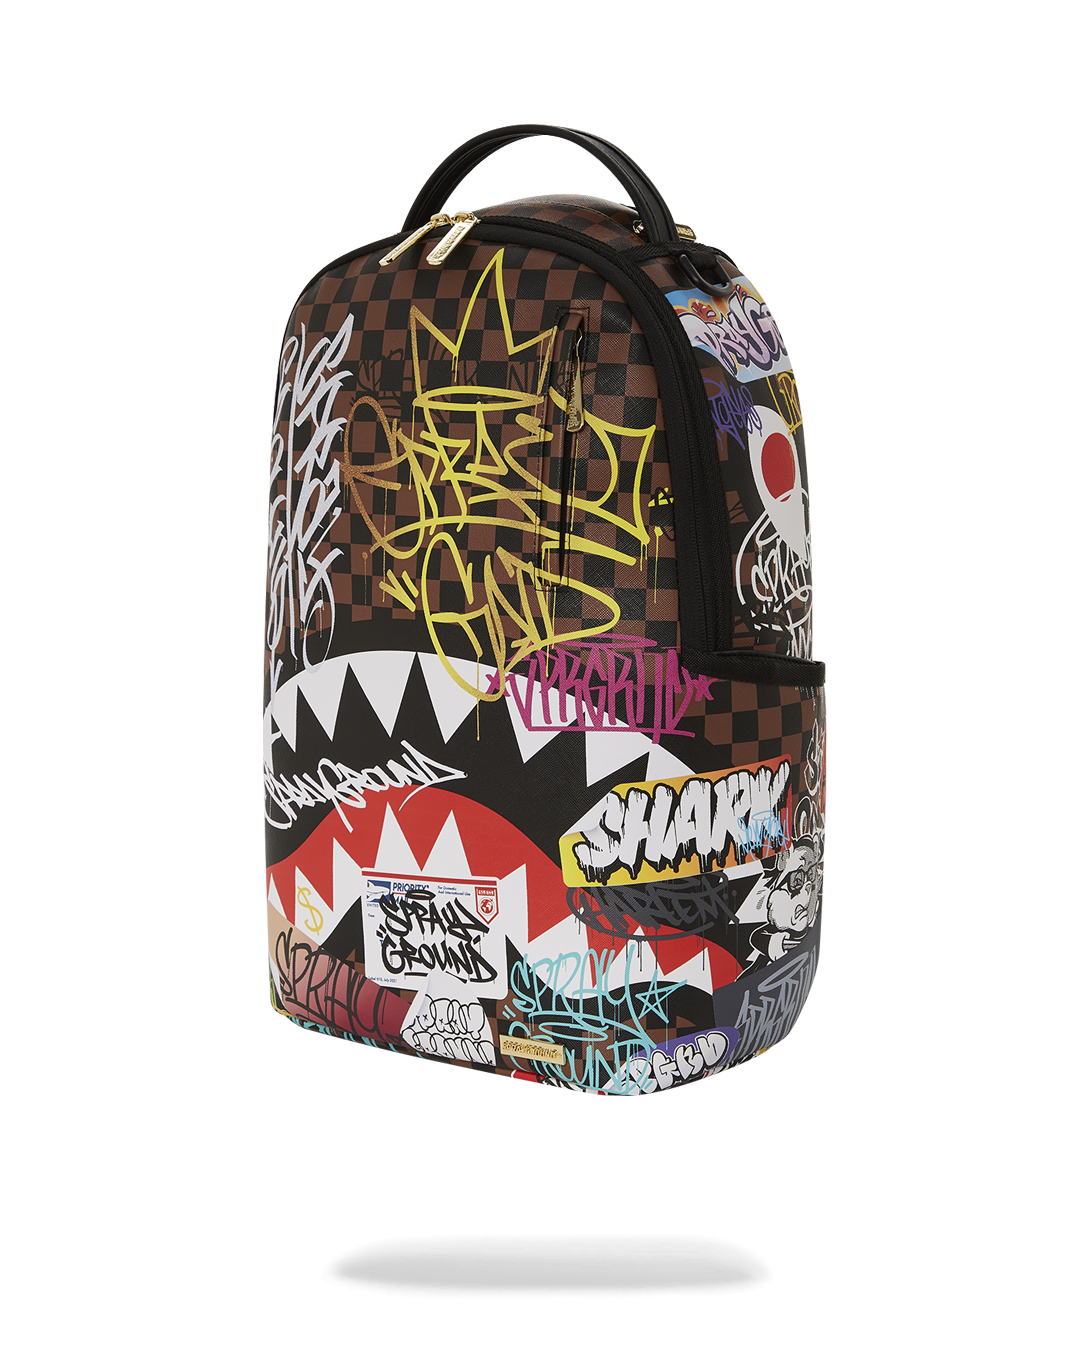 TAGGED UP SHARKS IN PARIS DLXSV BACKPACK